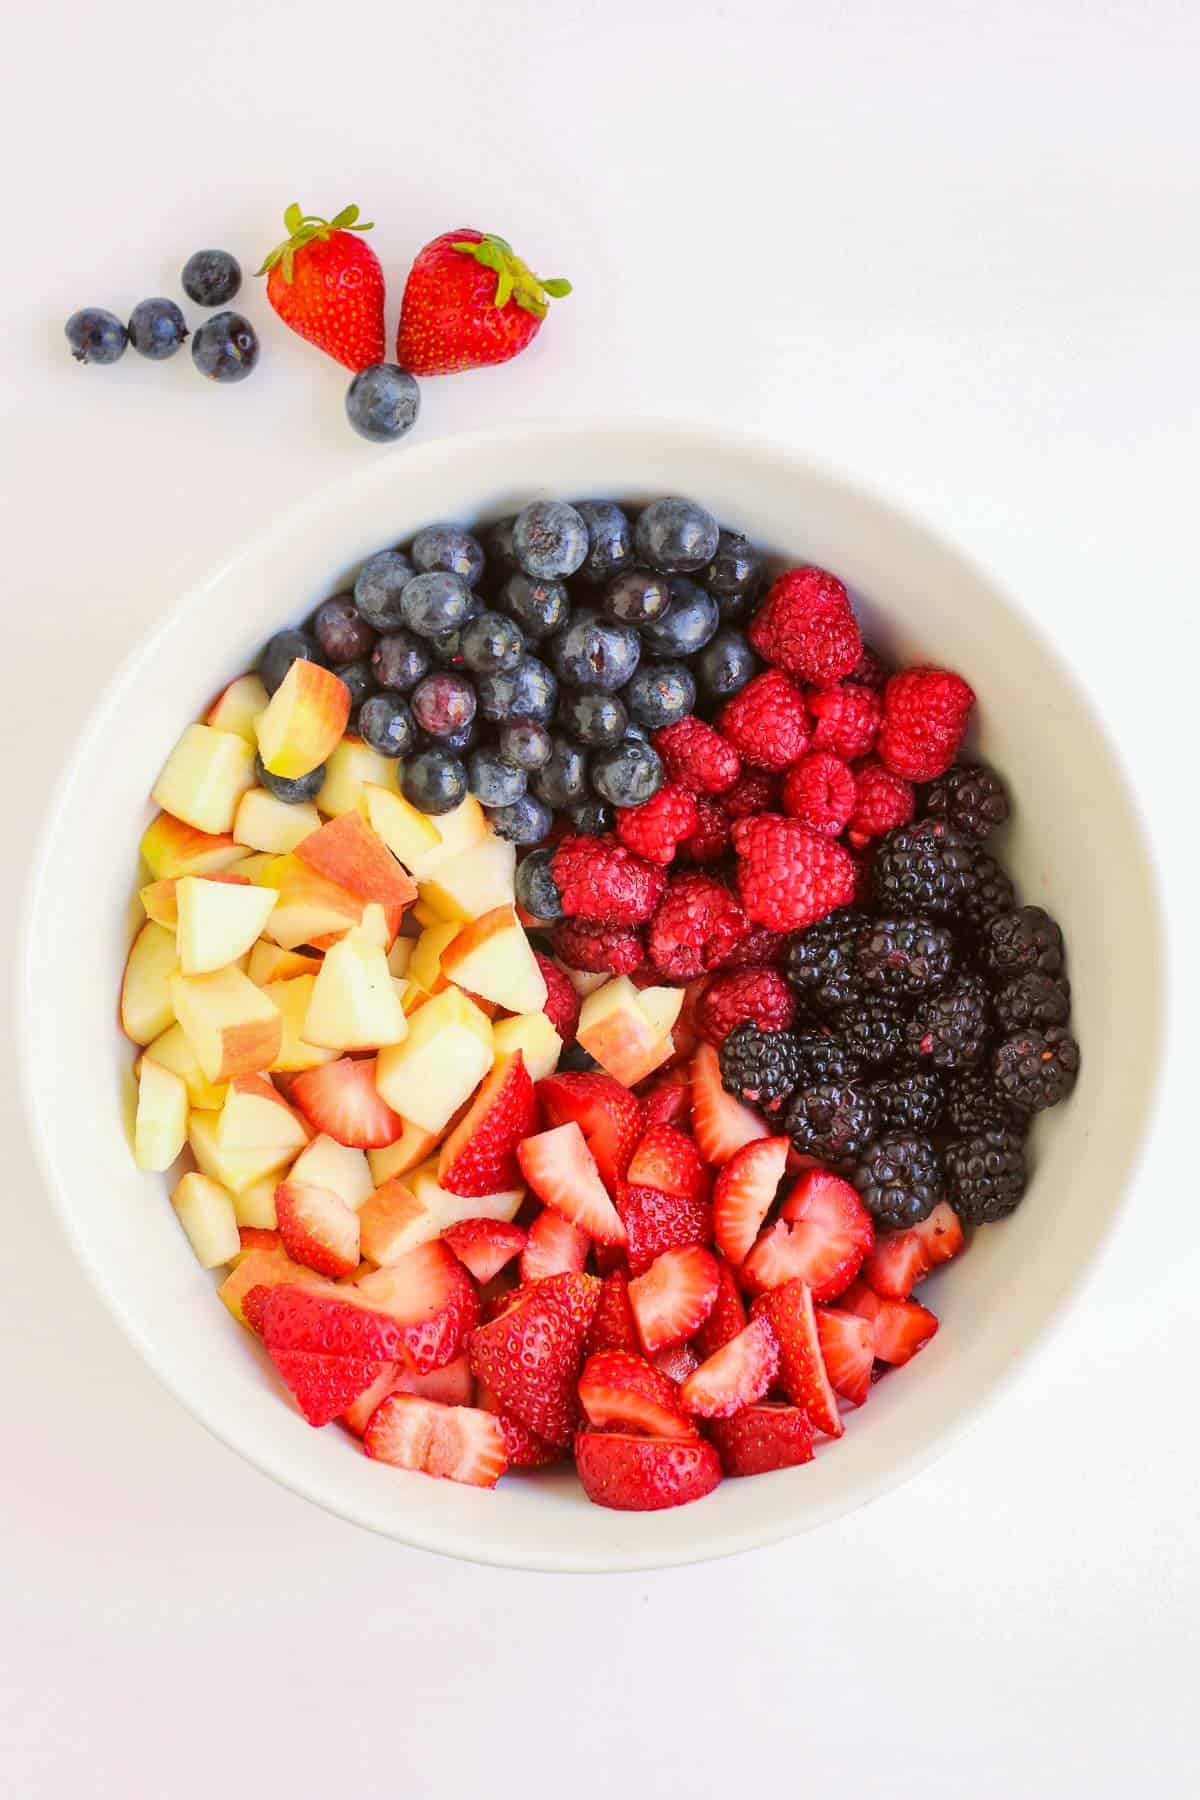 red white and blue fruit salad in bowl pre-mixed.